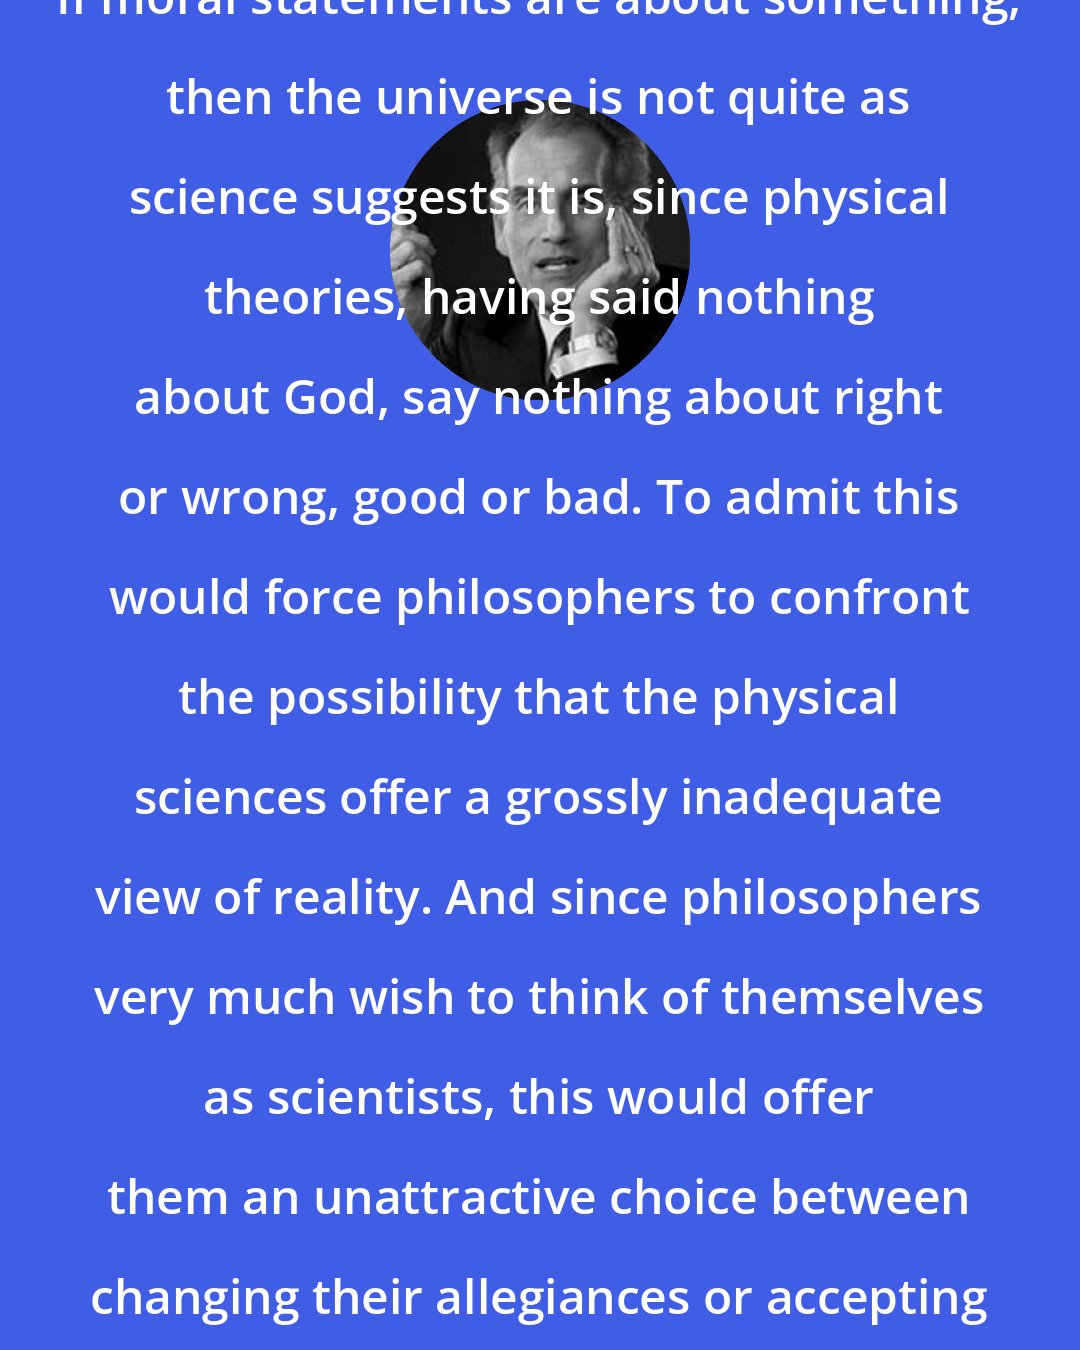 David Berlinski: If moral statements are about something, then the universe is not quite as science suggests it is, since physical theories, having said nothing about God, say nothing about right or wrong, good or bad. To admit this would force philosophers to confront the possibility that the physical sciences offer a grossly inadequate view of reality. And since philosophers very much wish to think of themselves as scientists, this would offer them an unattractive choice between changing their allegiances or accepting their irrelevance.